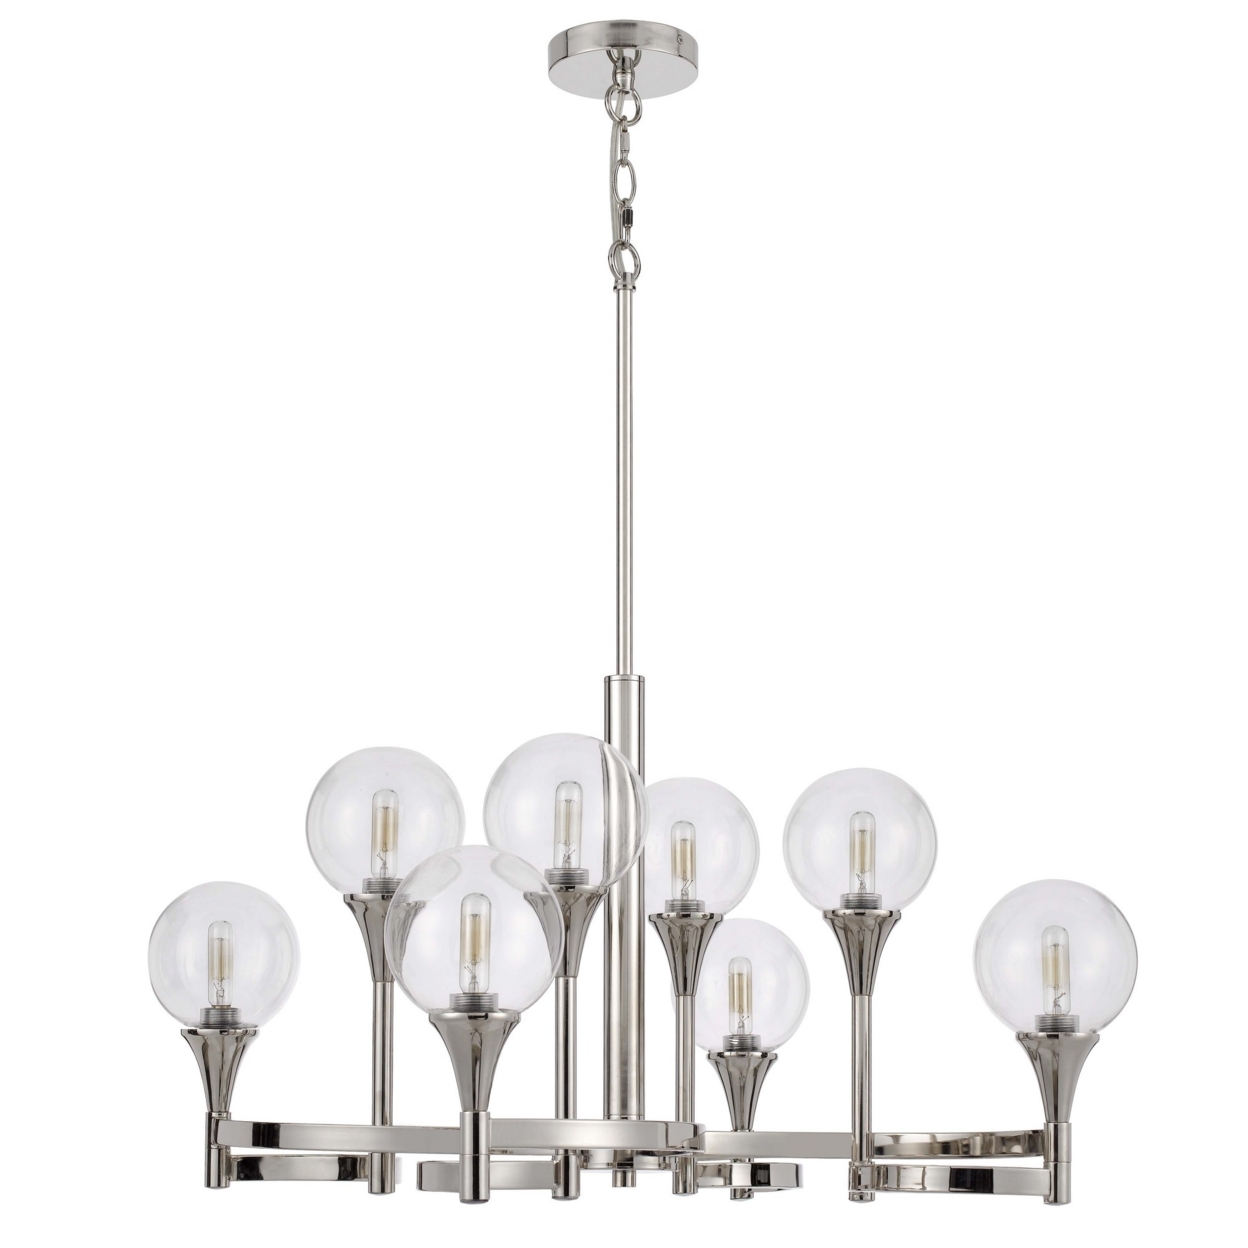 Chandelier With 8 Globe Glass Shades And Cone Design Holders, Chrome- Saltoro Sherpi